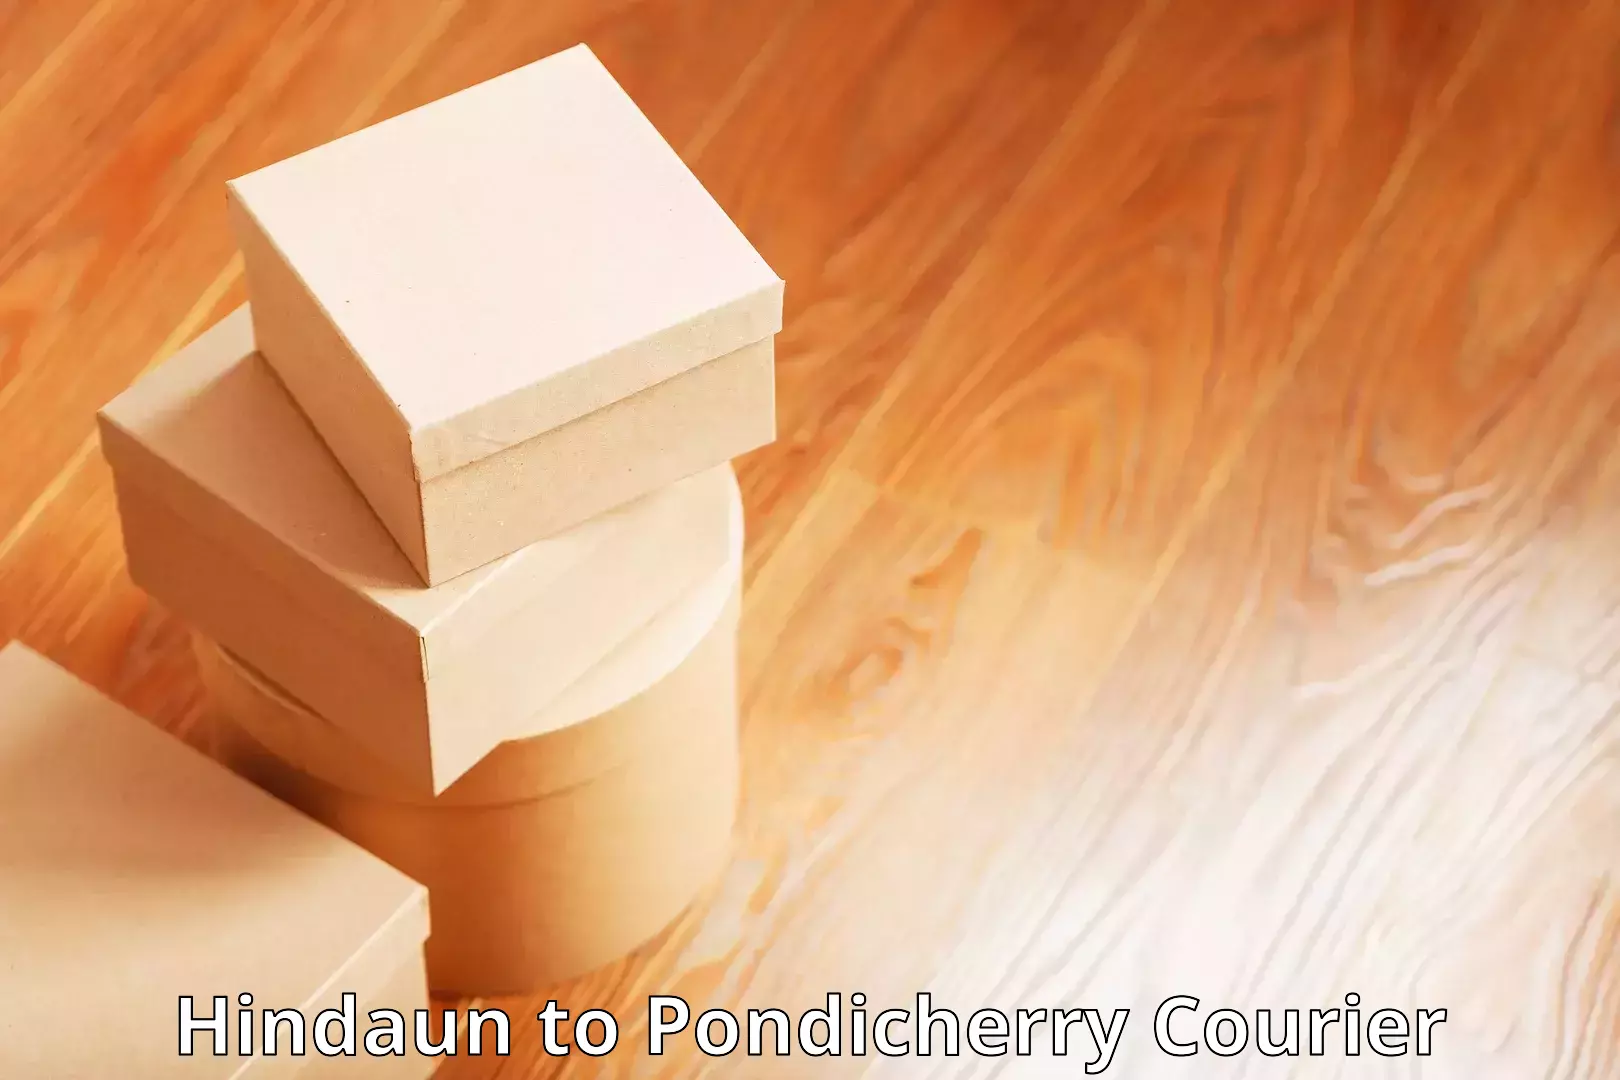 Business delivery service in Hindaun to Pondicherry